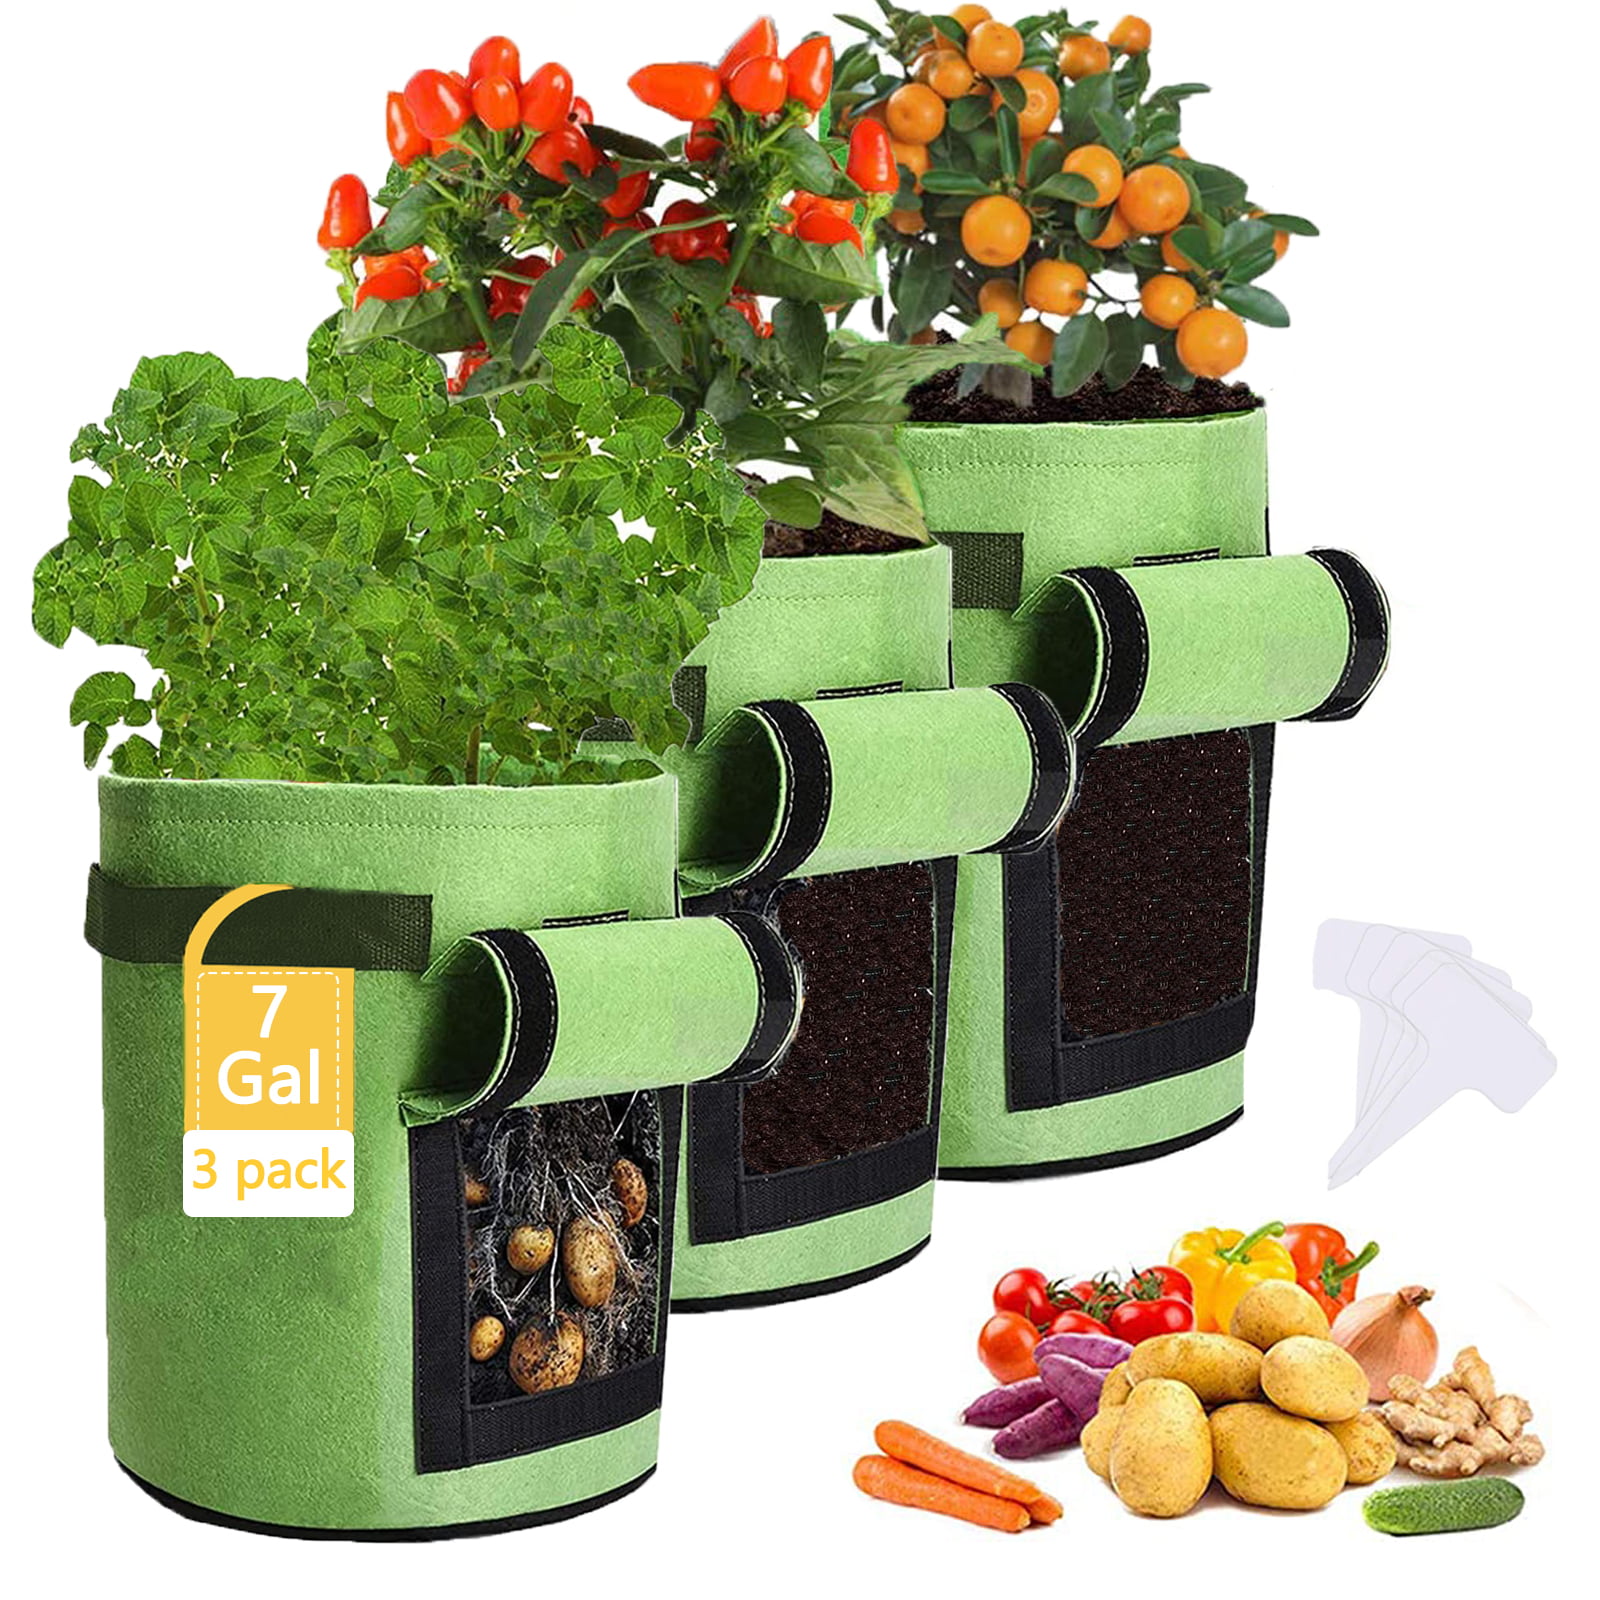 YQLOGY Potato-Grow-Bags, Garden Vegetable Planter with Handles&Access Flap  for Vegetables,Tomato,Carrot